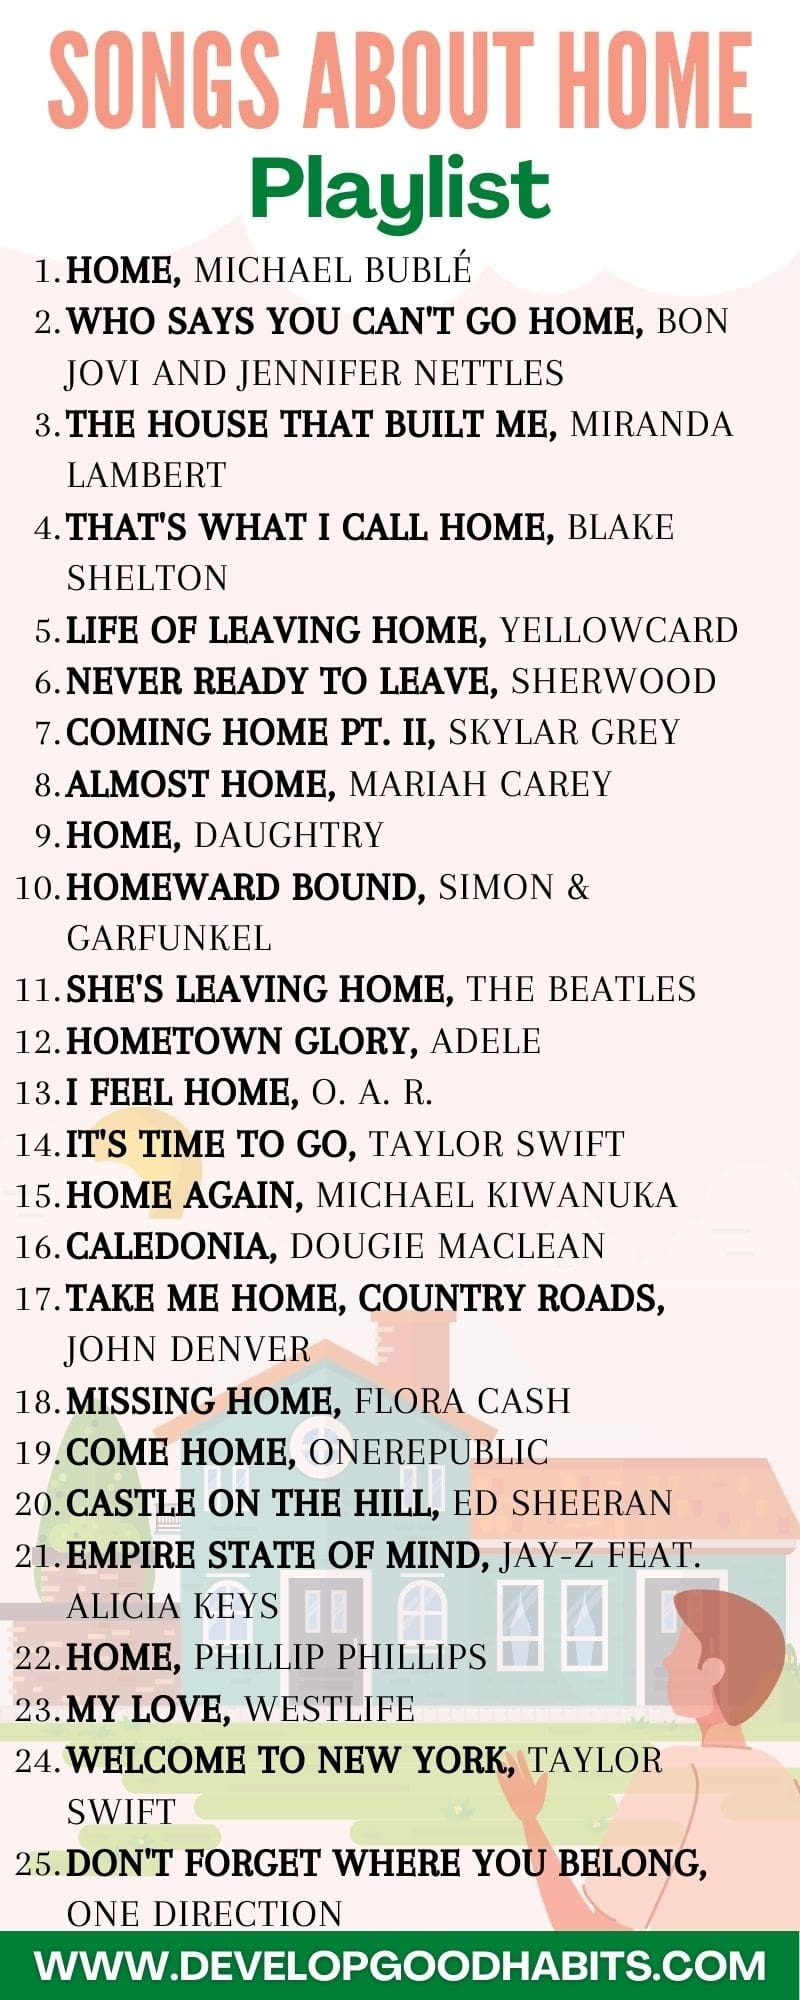 20 Songs to Listen to When Moving to a New Place